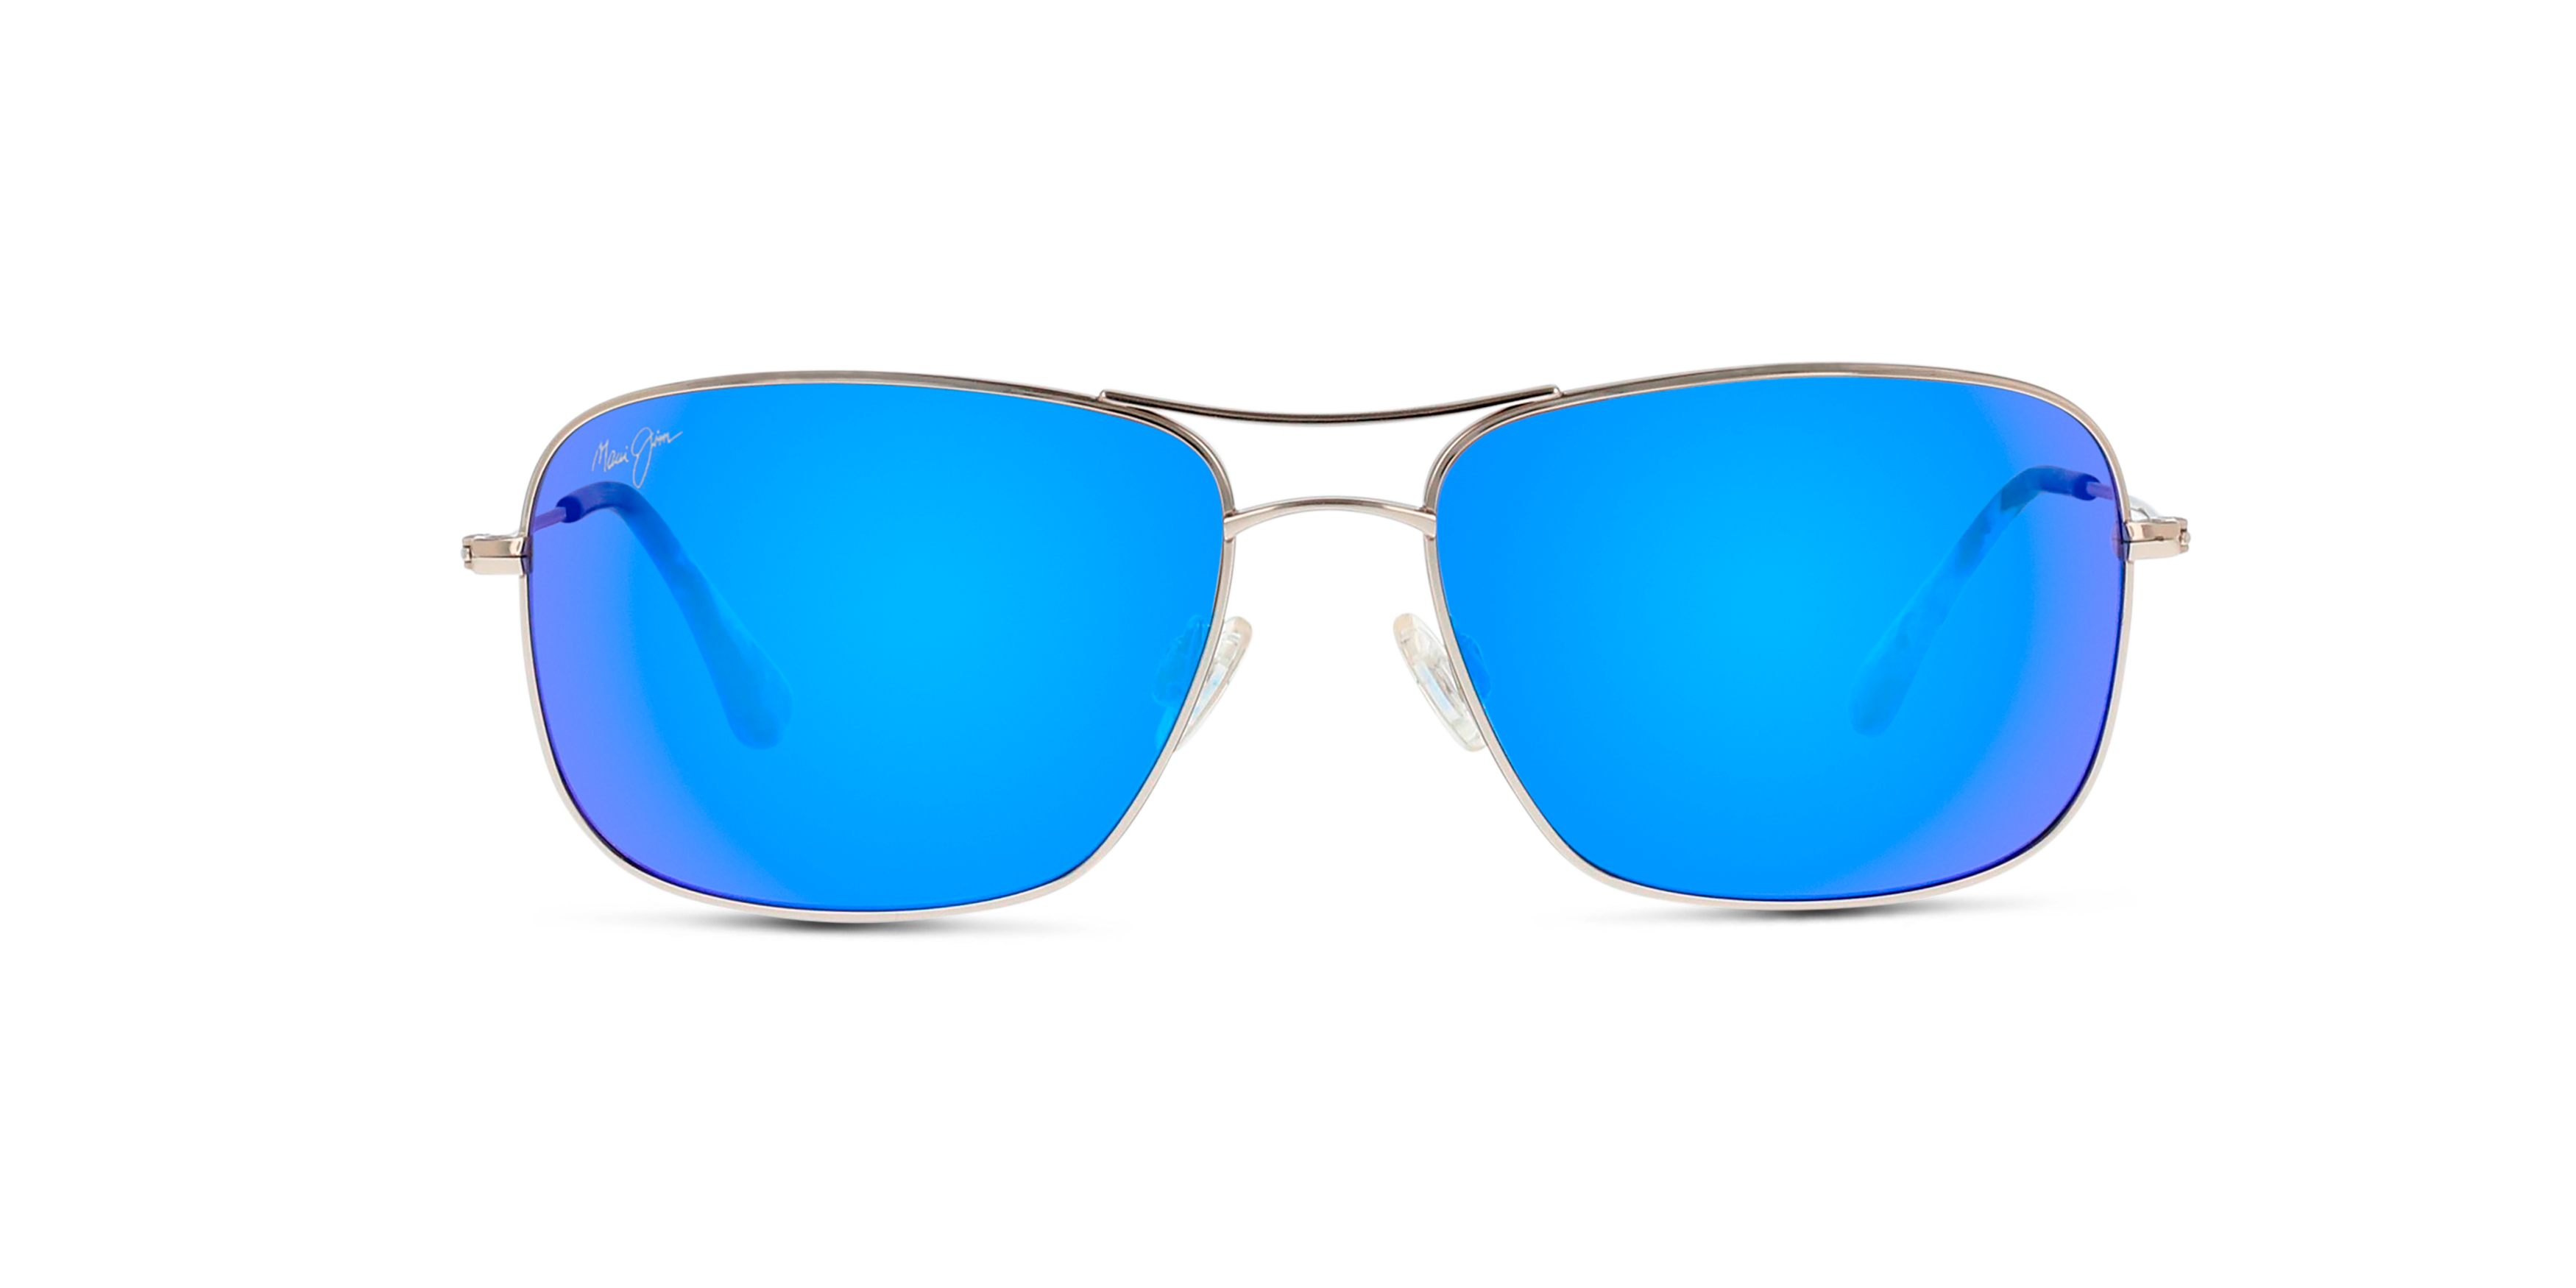 [products.image.front] MAUI JIM 246 Wiki Wiki 17